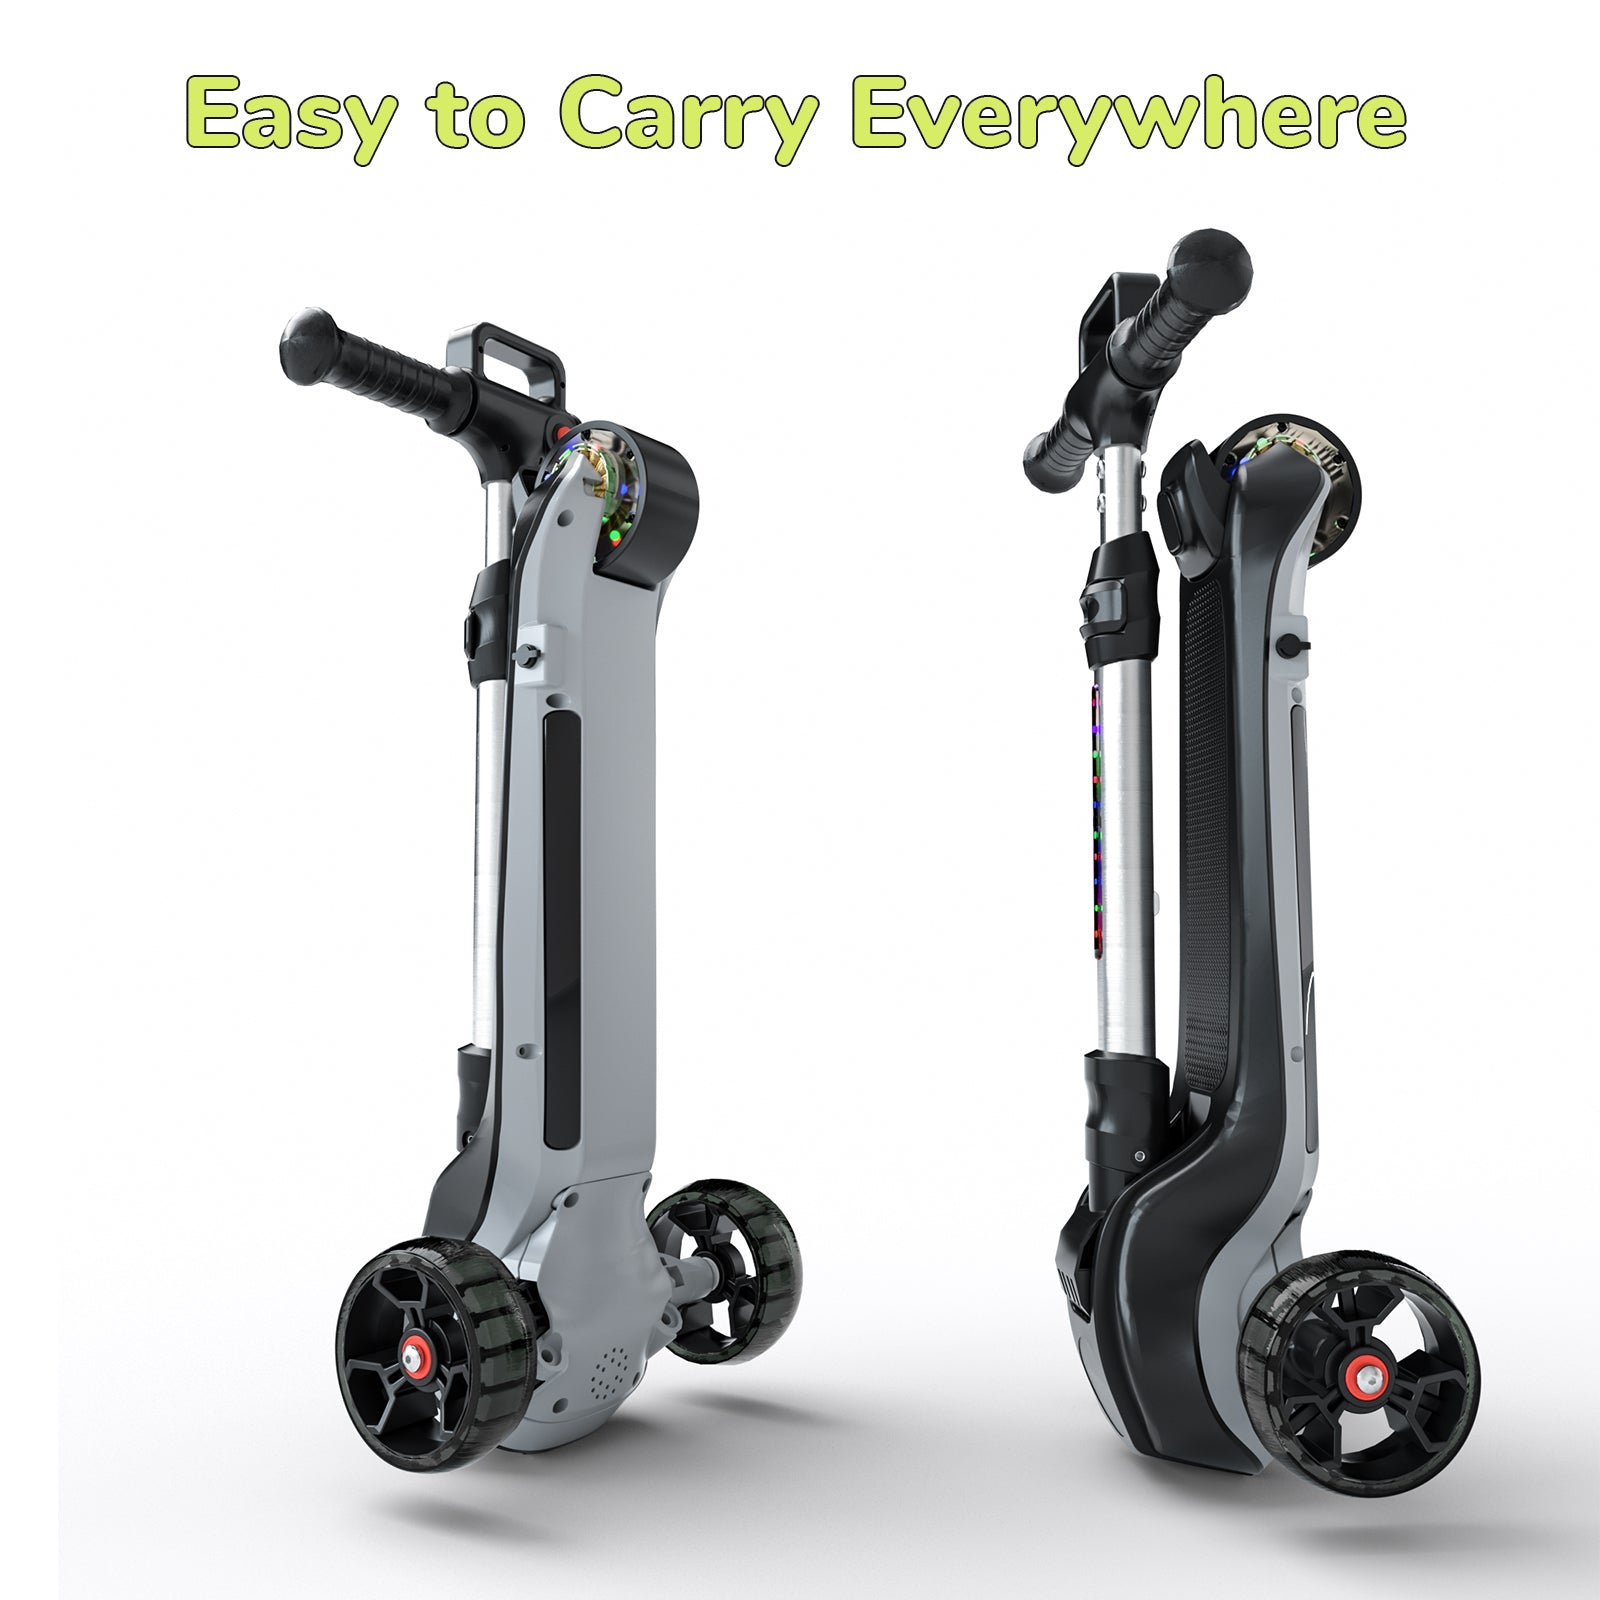 iScooter iK2 3-Wheel Electric Scooter Adjustable Height for Kids Ages 3-8 Unique Gift